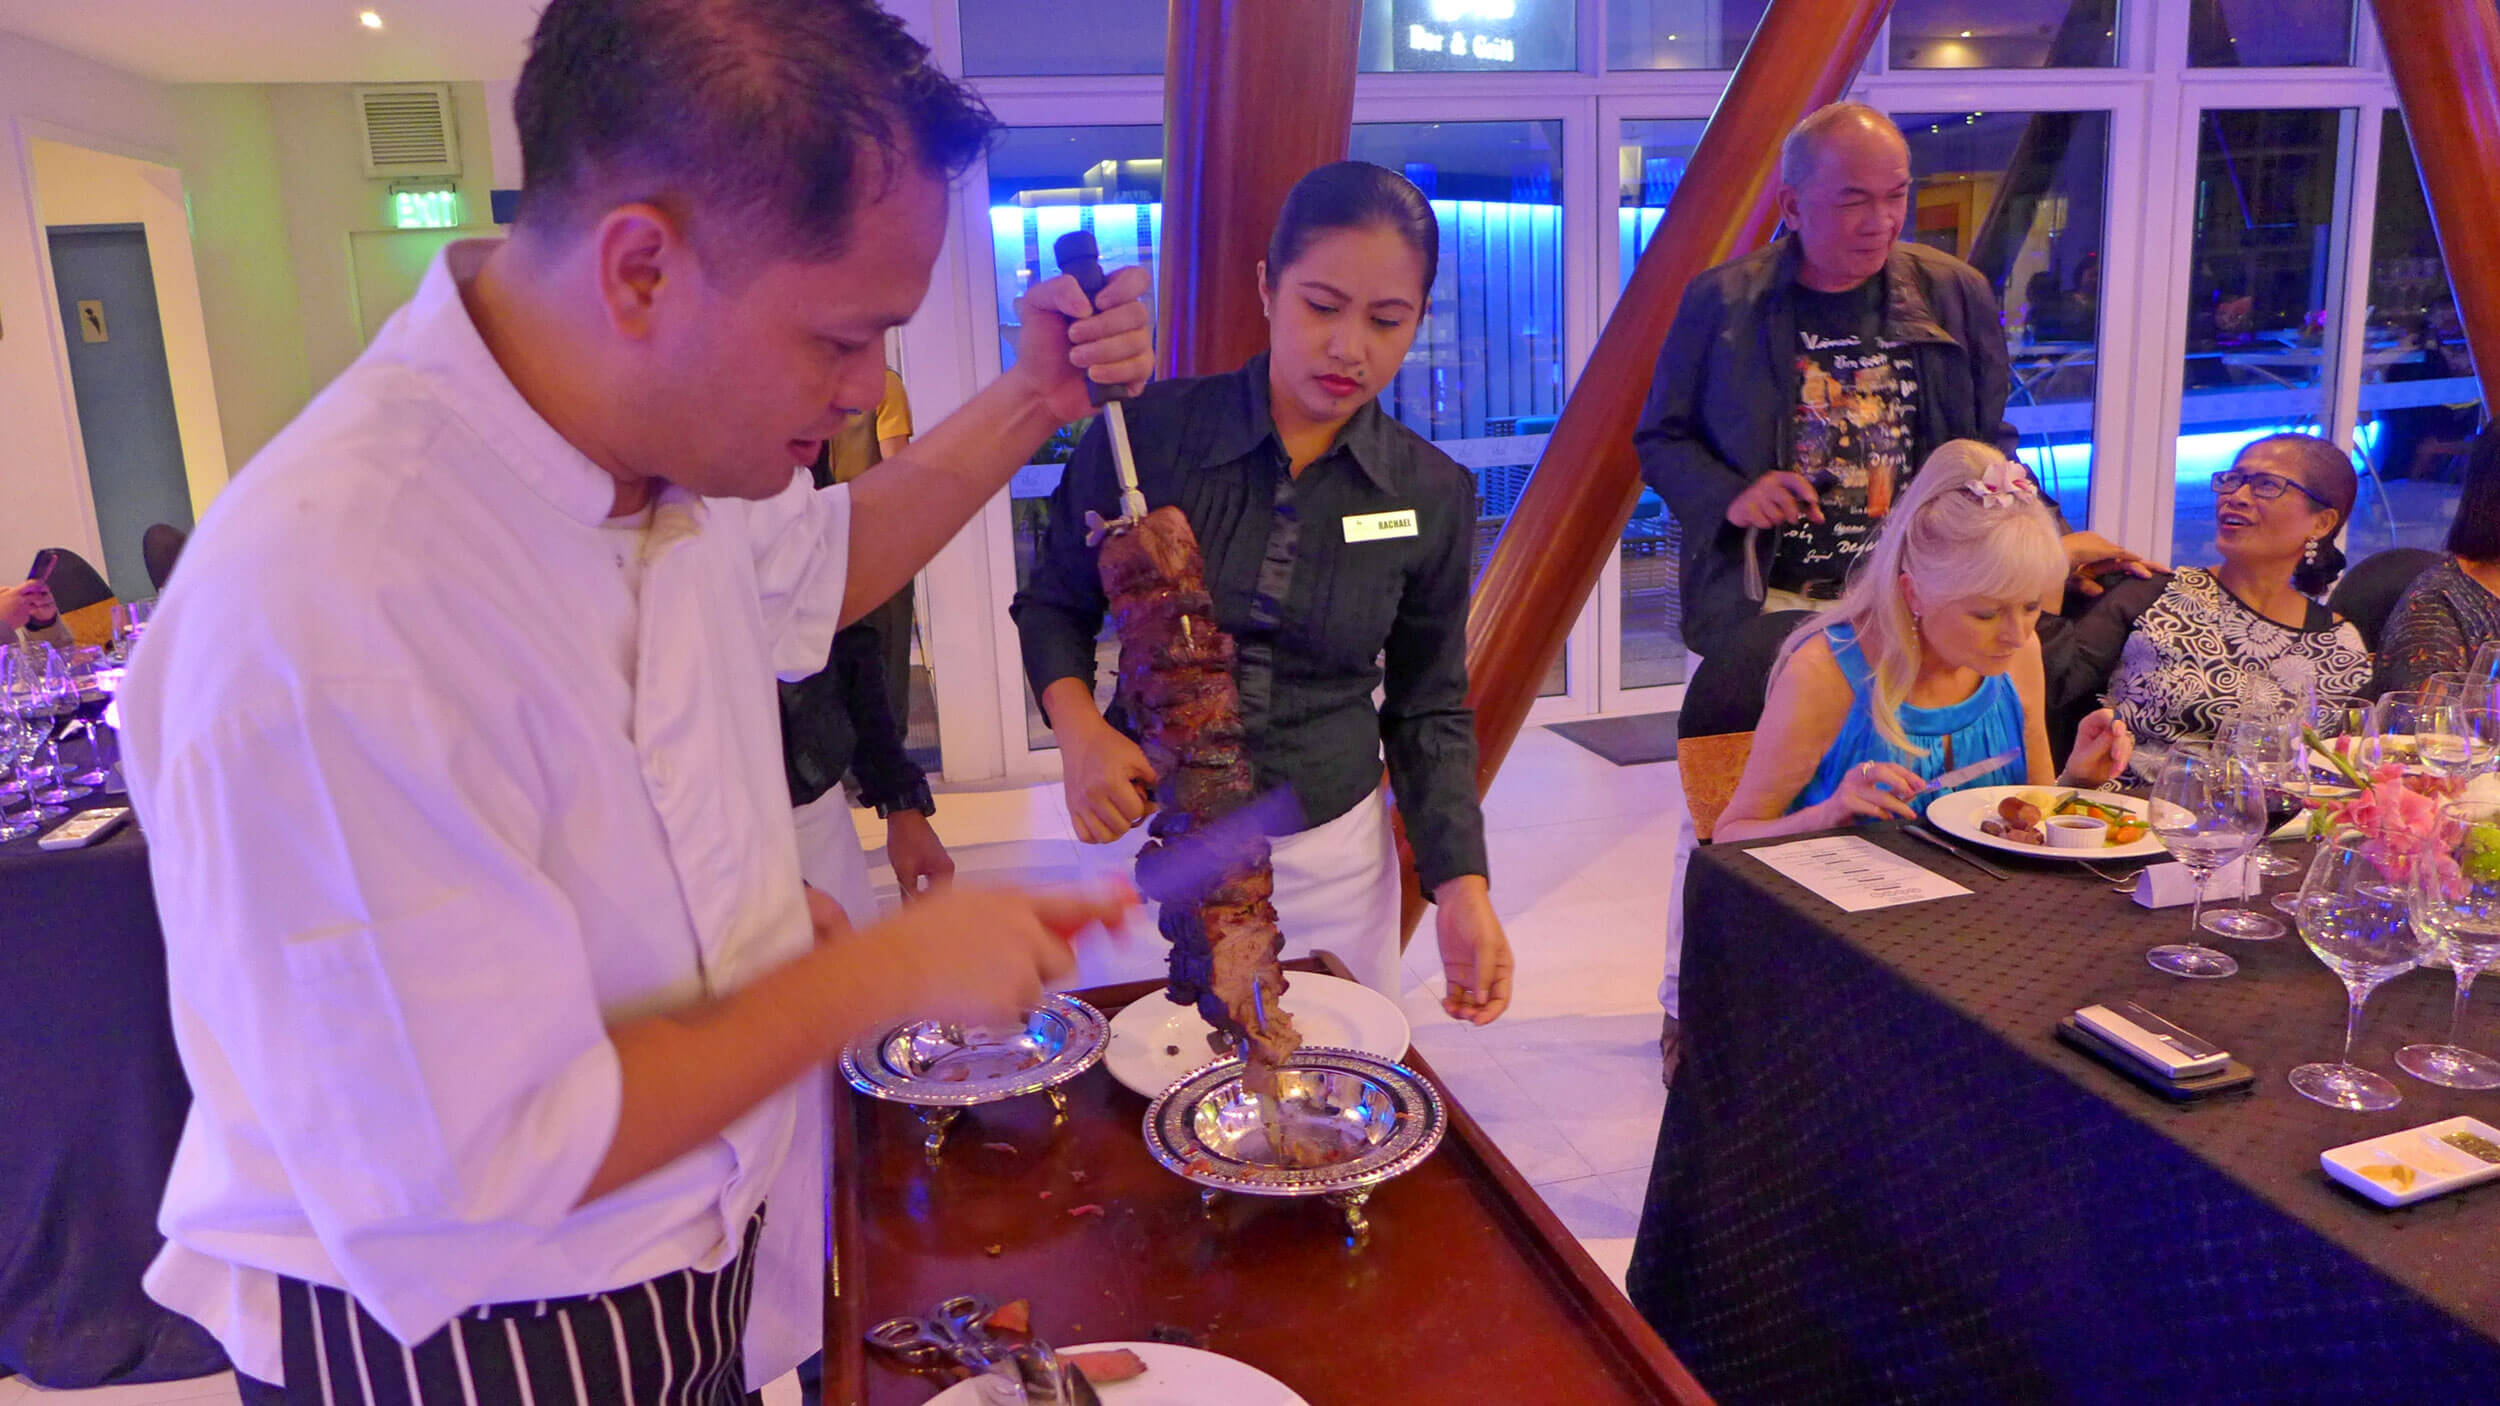 Moonlit Wine Dinner at the Blu Bar and Grill of Marco Polo Plaza Cebu